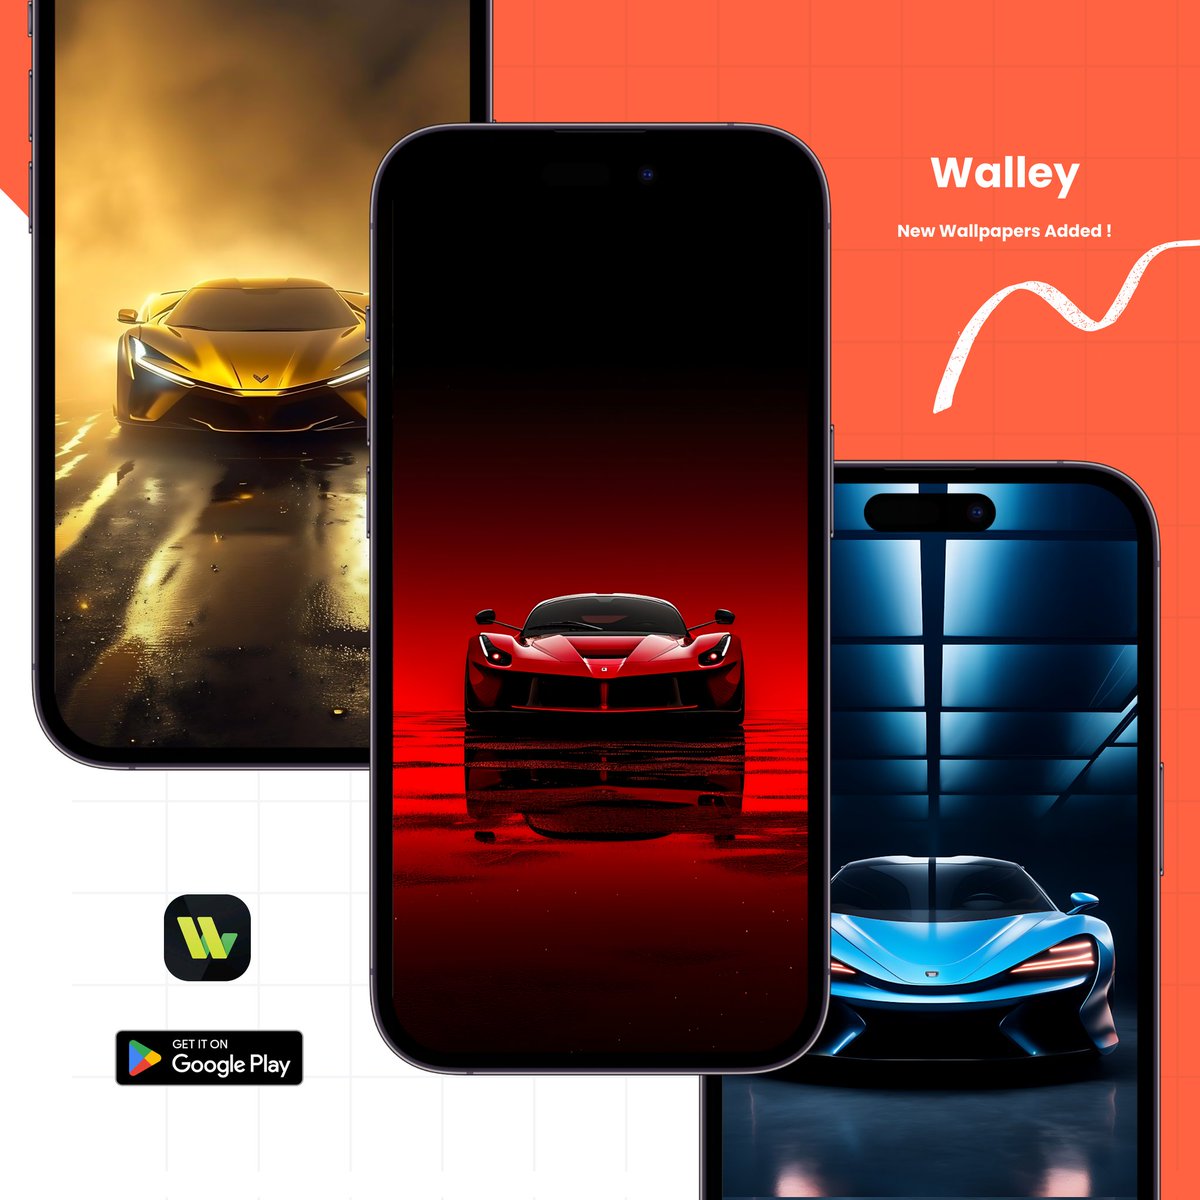 Rev Up Your Device with the Most Jaw-Dropping Supercar Wallpapers Yet.'

Get Walley Now Its free 👇
bit.ly/WalleyAi